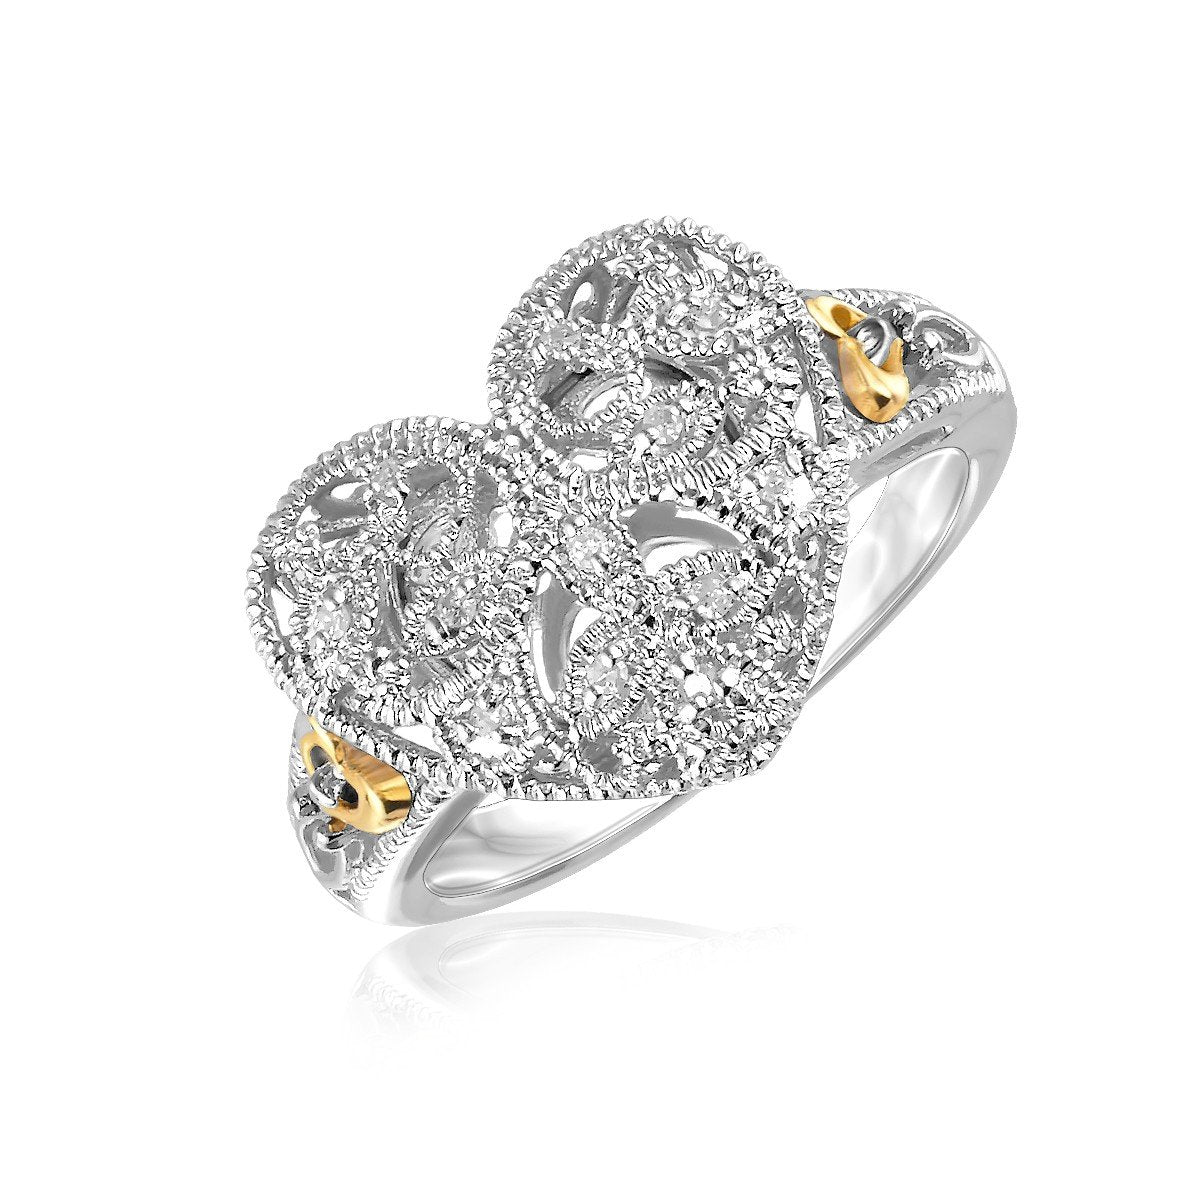 Designer Sterling Silver and 14k Yellow Gold Filigree Heart Ring with Diamonds - Drakoi Marketplace